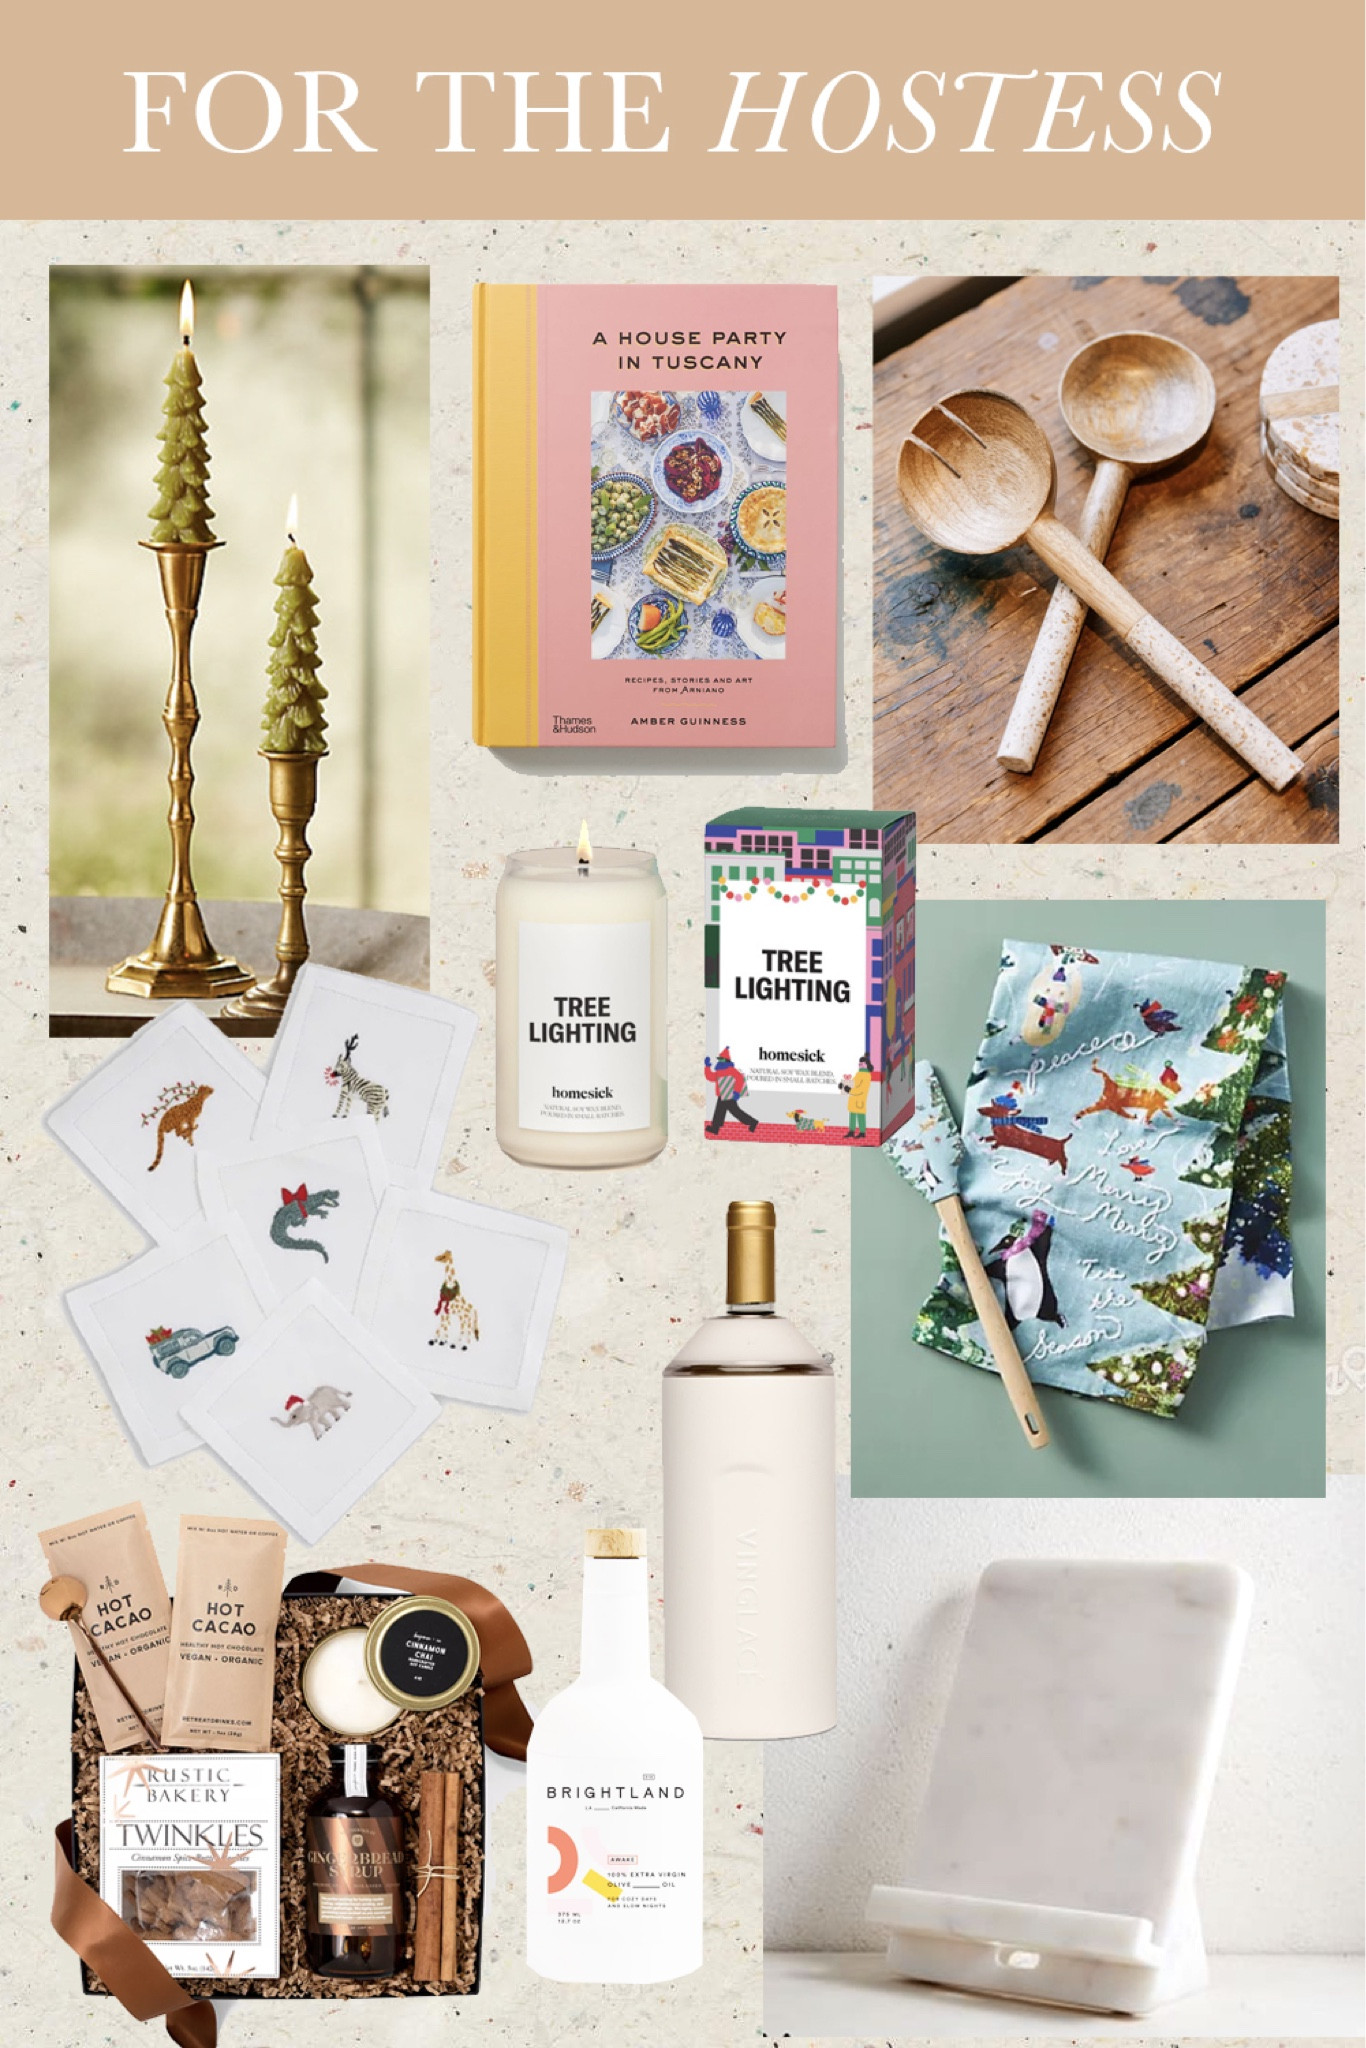 Amber Lewis for Anthropologie … curated on LTK